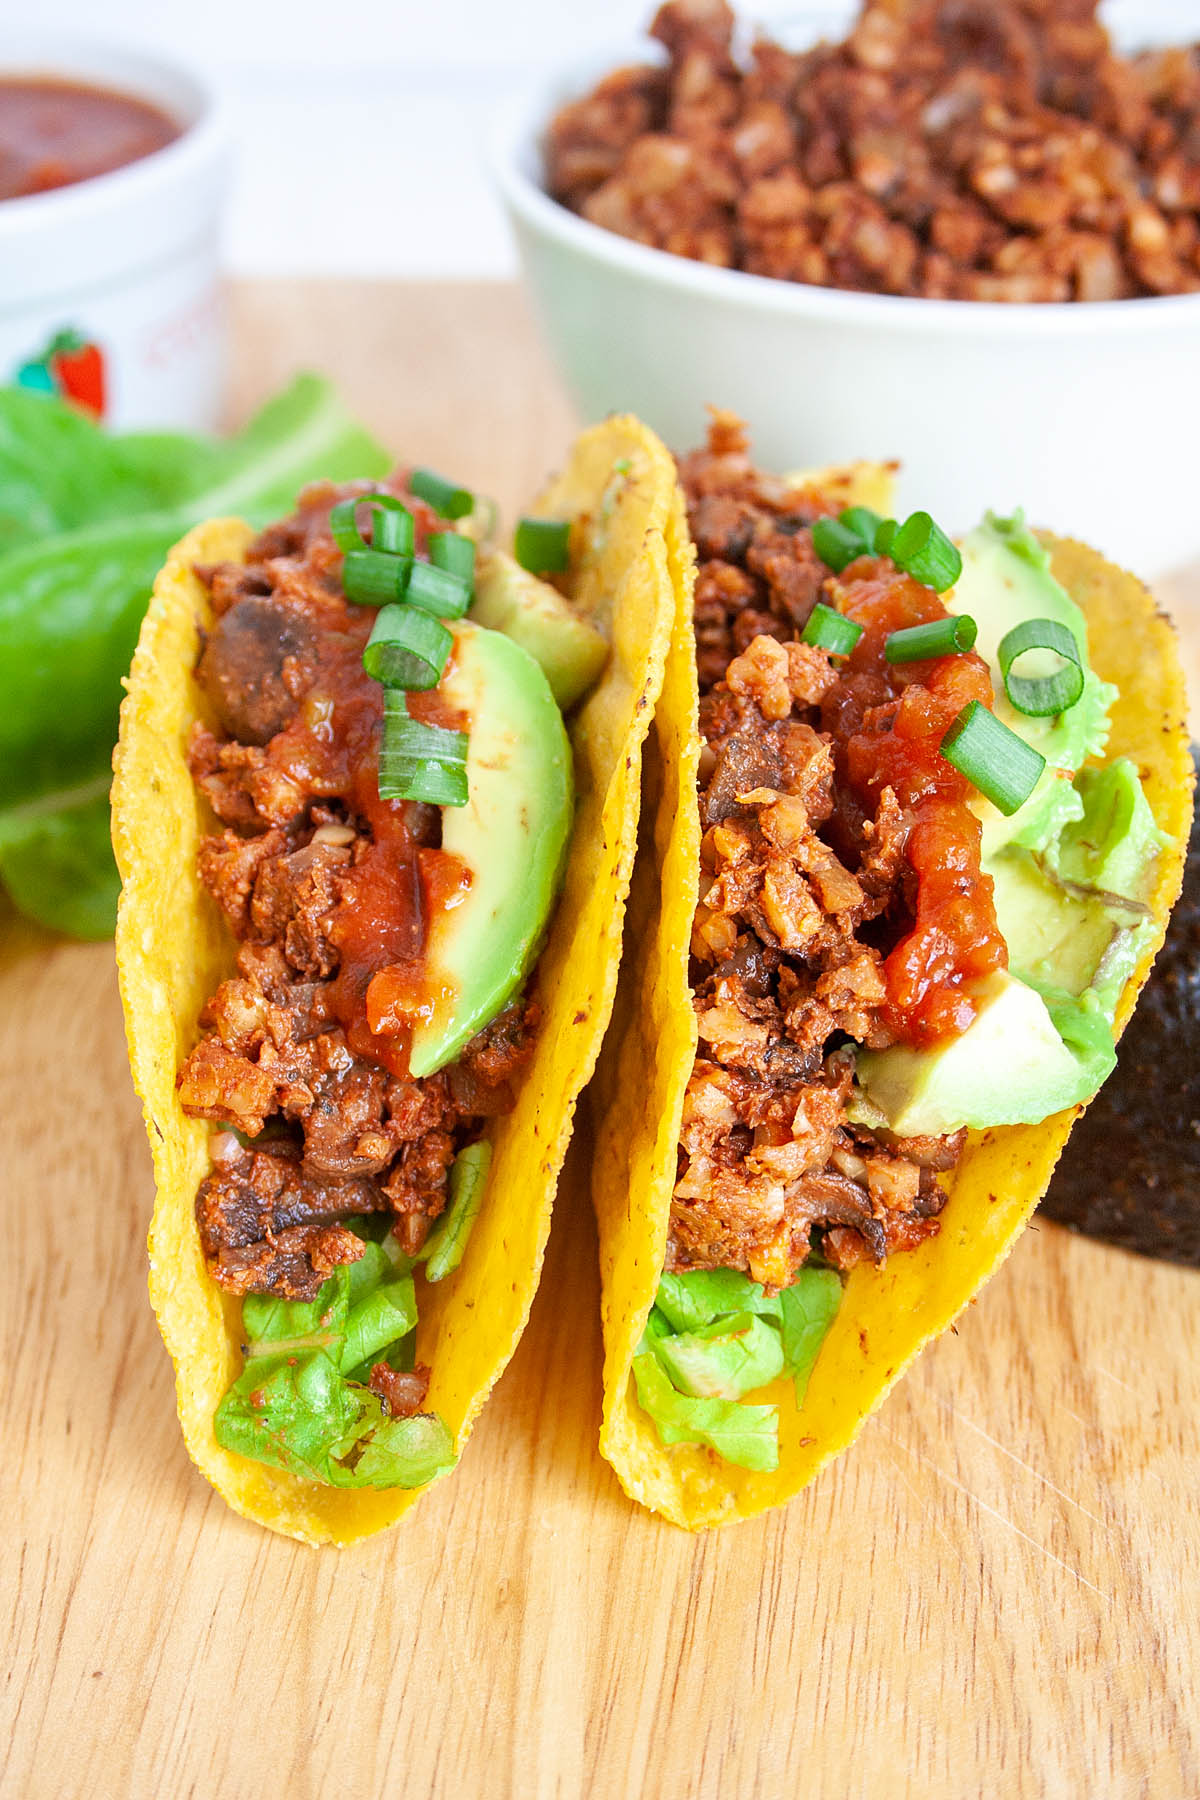 Walnut Taco Meat in tacos with avocado, lettuce, and green onions.